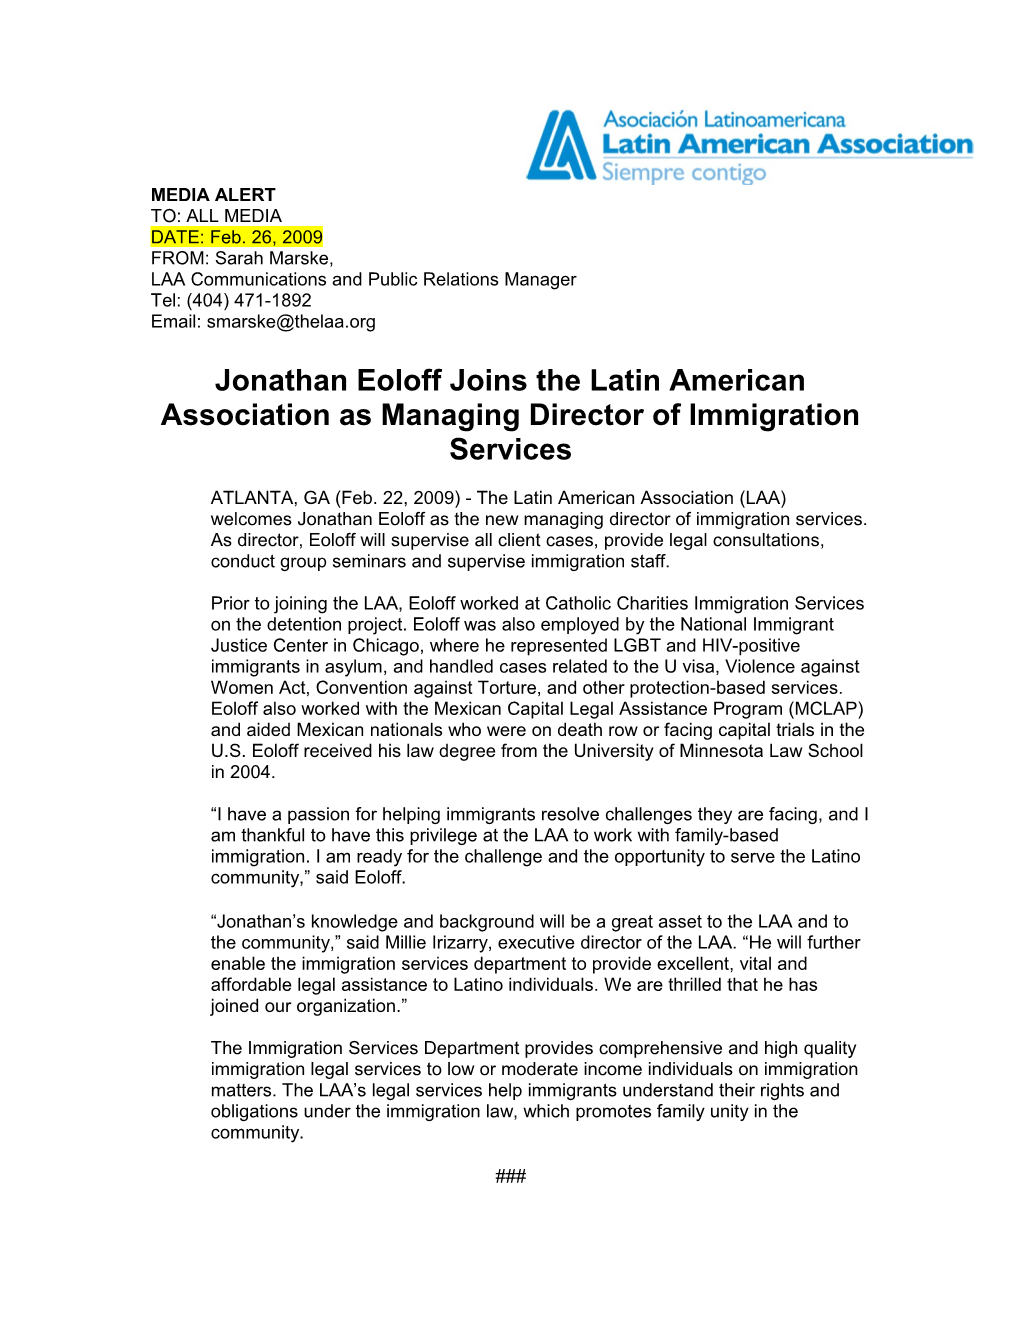 Jonathan Eoloff Joins the Latin American Association As Managing Director of Immigration